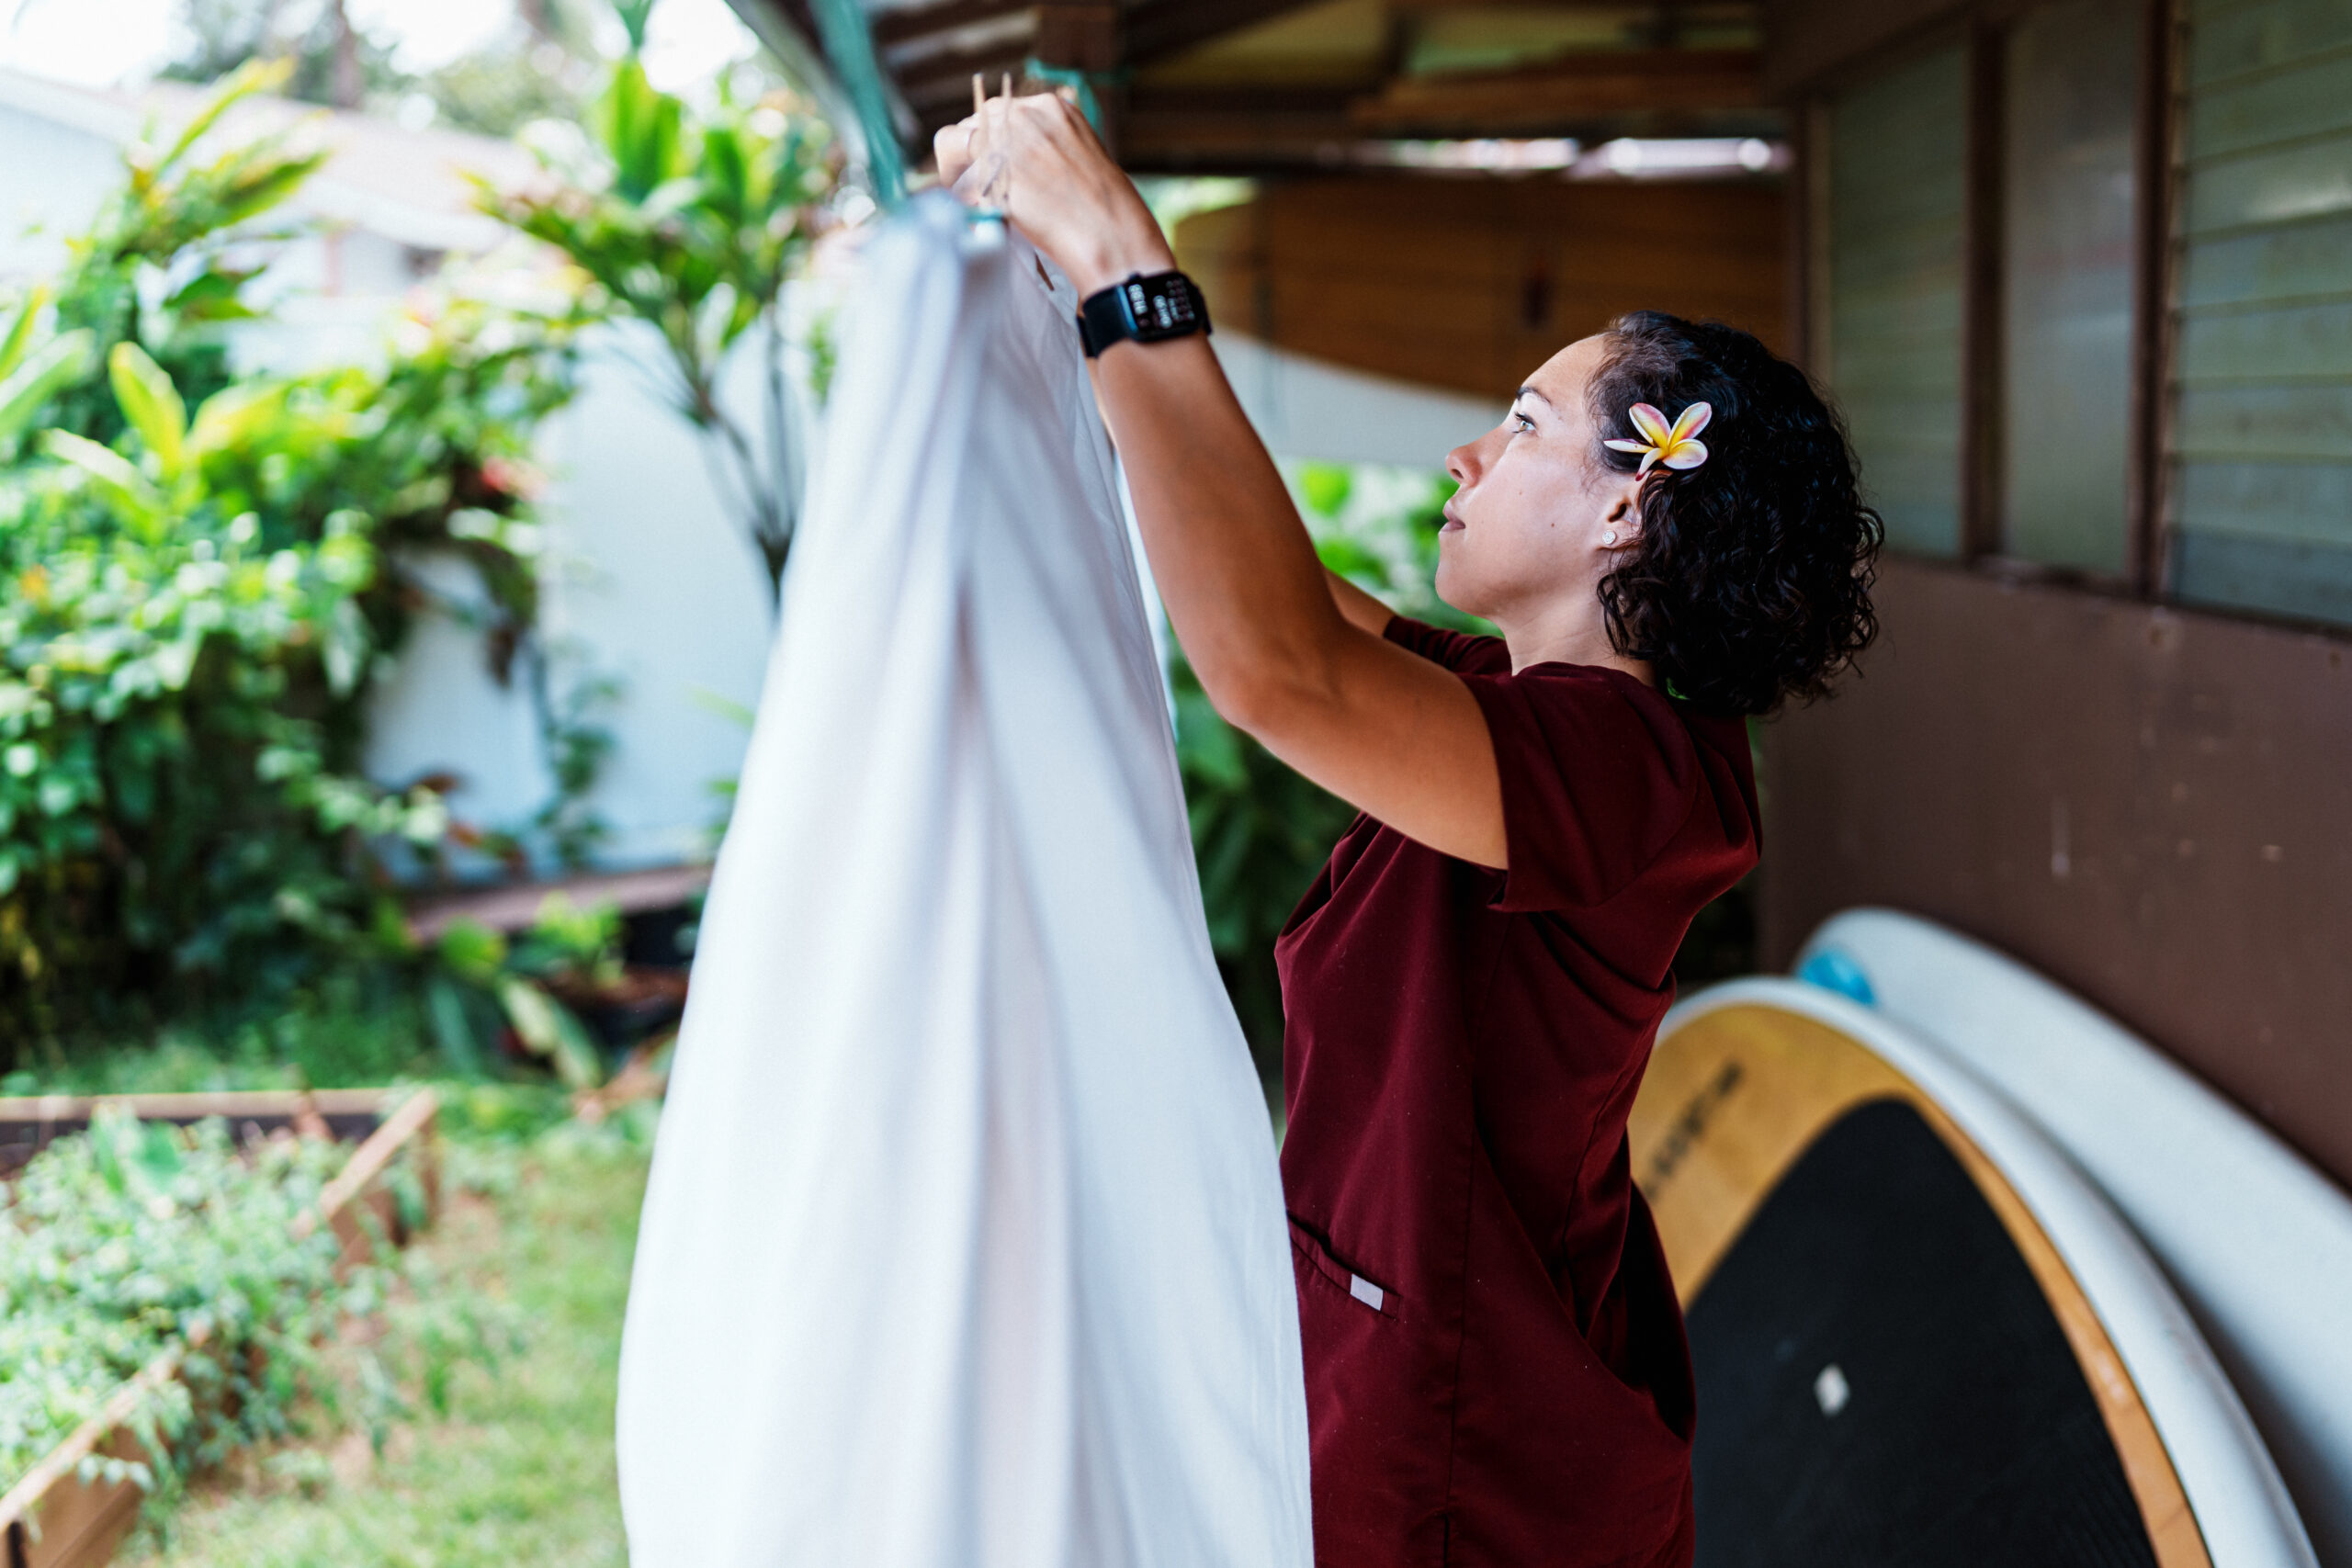 An Eurasian woman of Hawaiian and Chinese descent wearing medical scrubs hangs laundry to dry in the back yard of her home in Hawaii after returning home from work as a nurse.